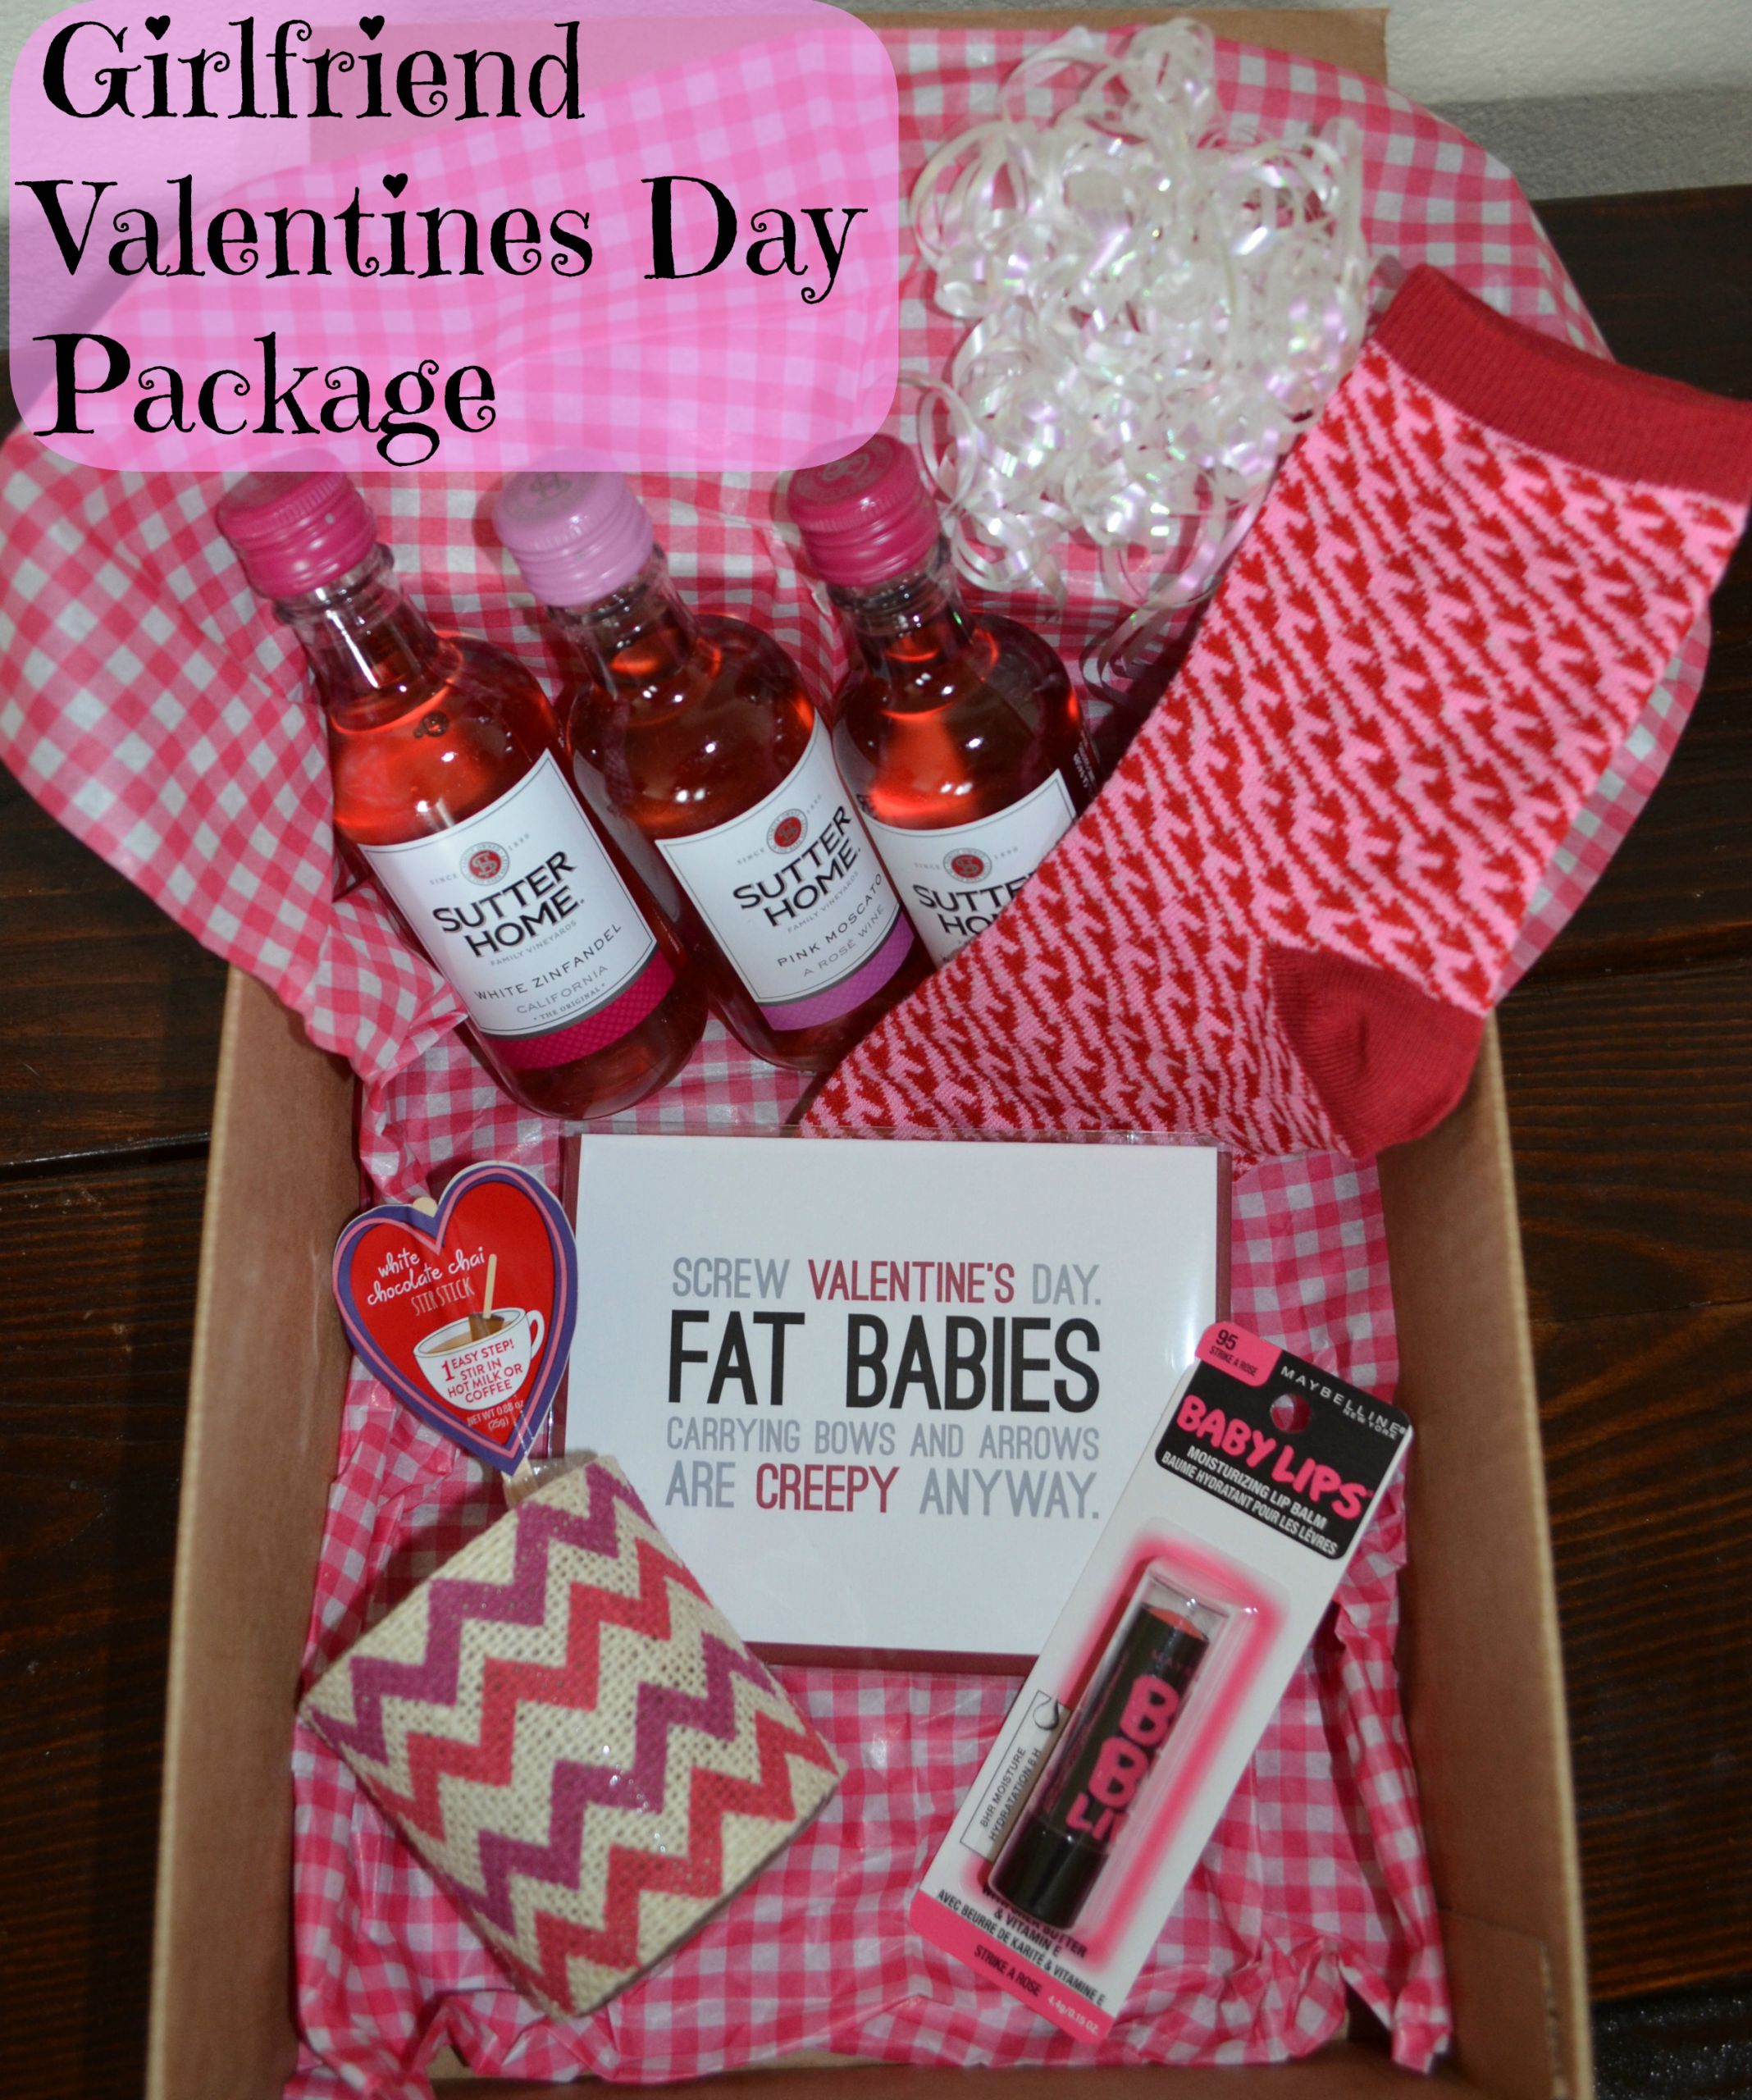 Valentine Gift Ideas For Girlfriend
 24 ADORABLE GIFT IDEAS FOR THE WOMEN IN YOUR LIFE